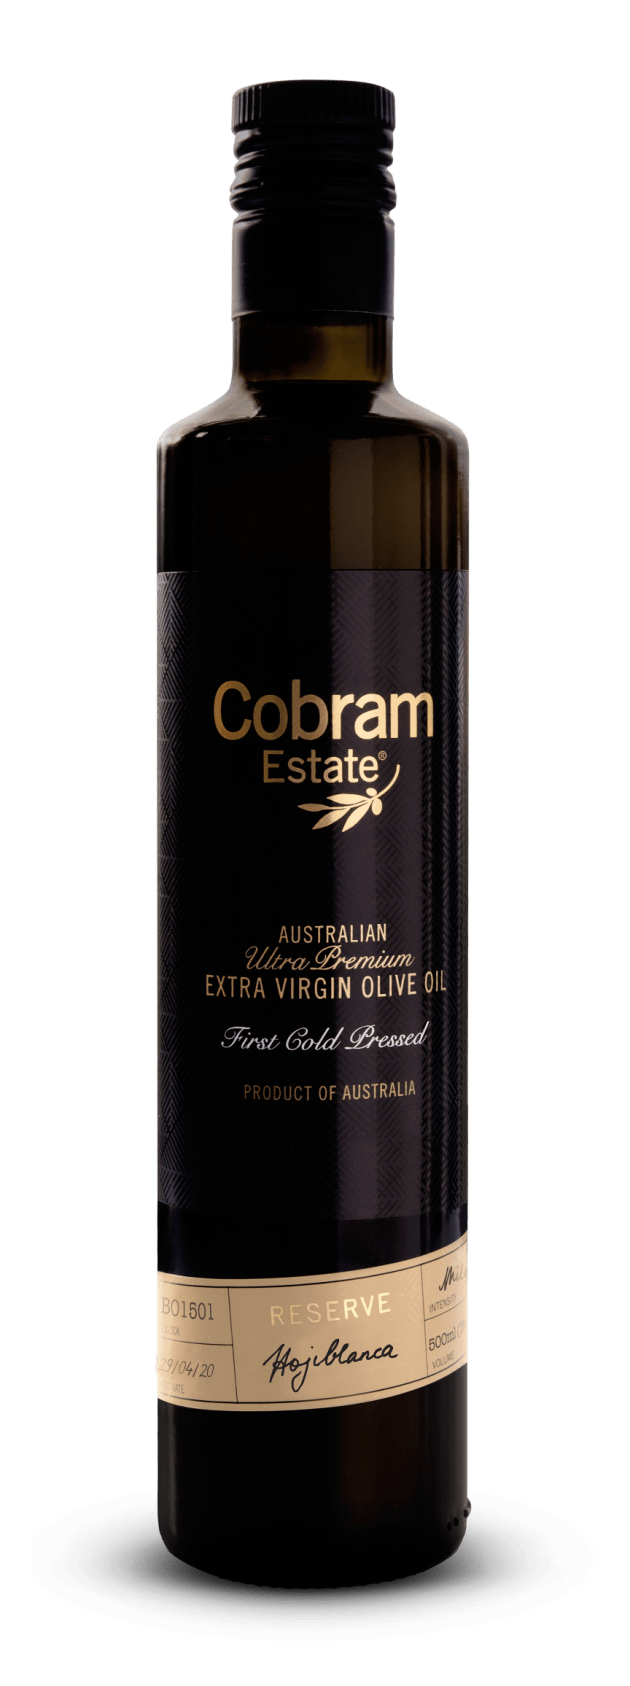 Cobram Estate’s Black Label Hojiblanca Extra Virgin Olive Oil was awarded the best oil in the Southern Hemisphere by the International Olive Council at the Mario Solinas 2020 awards.